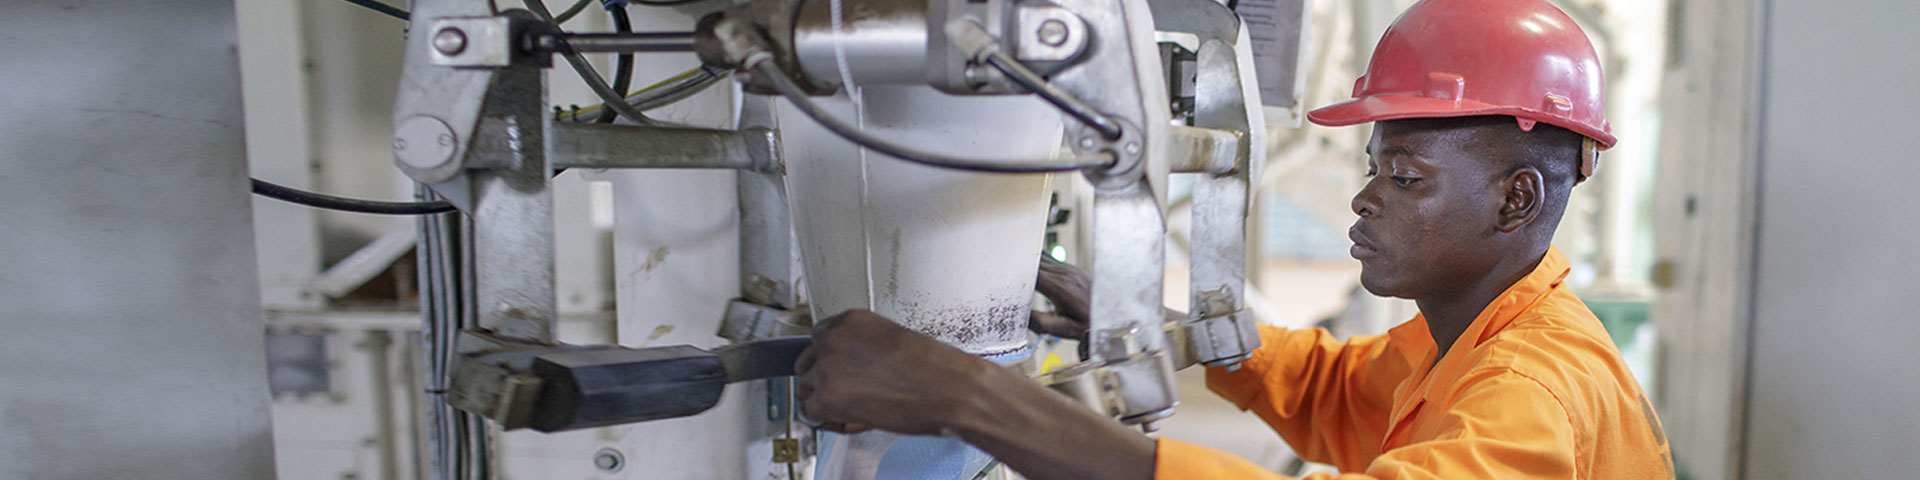 An industrial worker operating a machine.